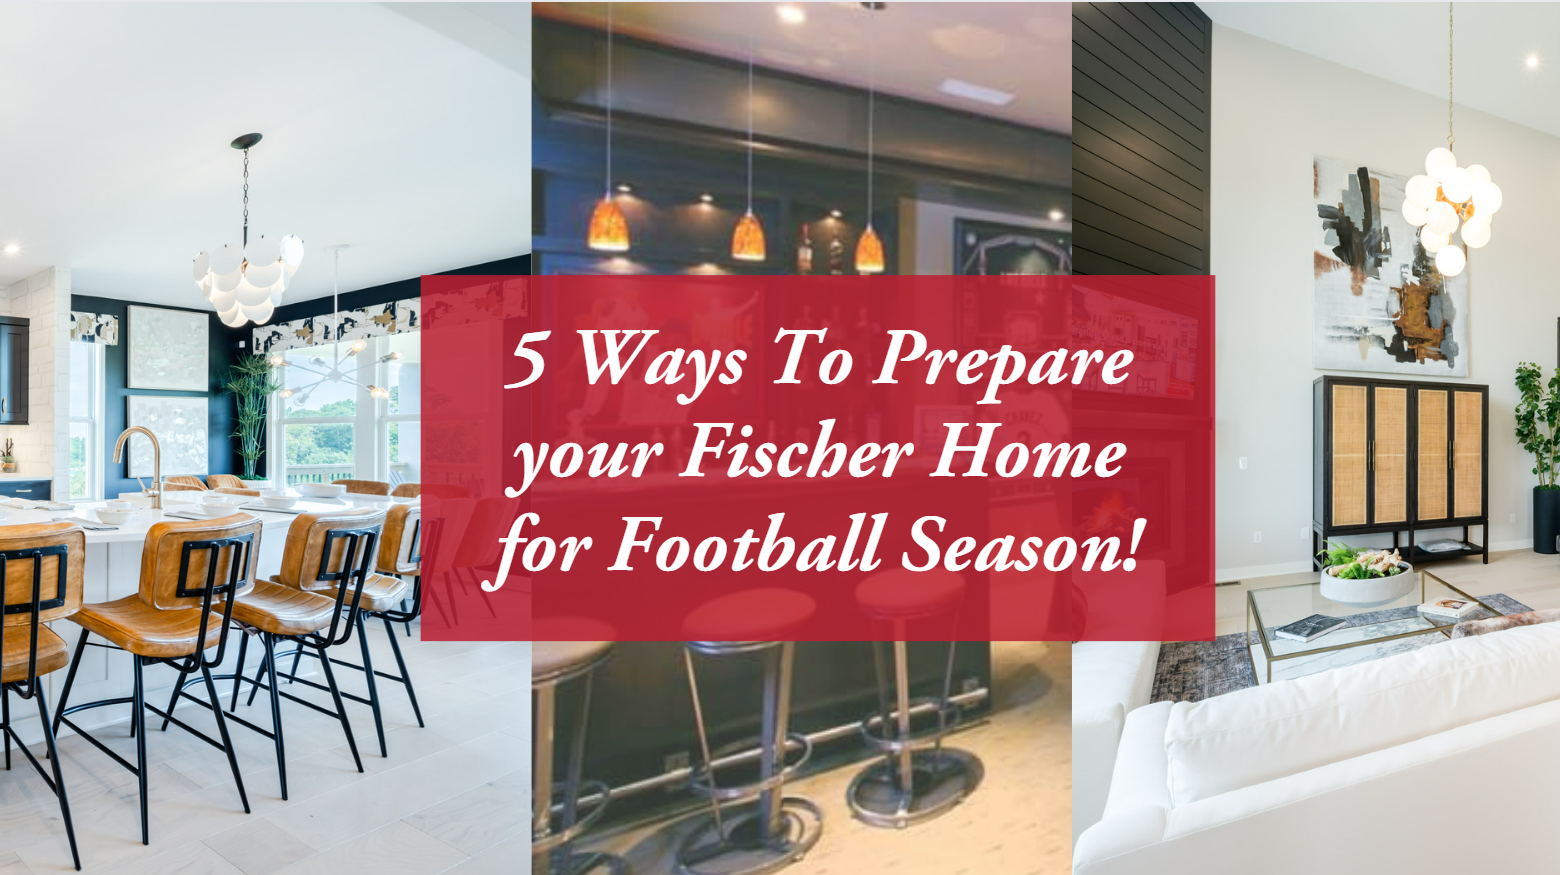 5 Ways to Prepare your Fischer Home for the Football Season